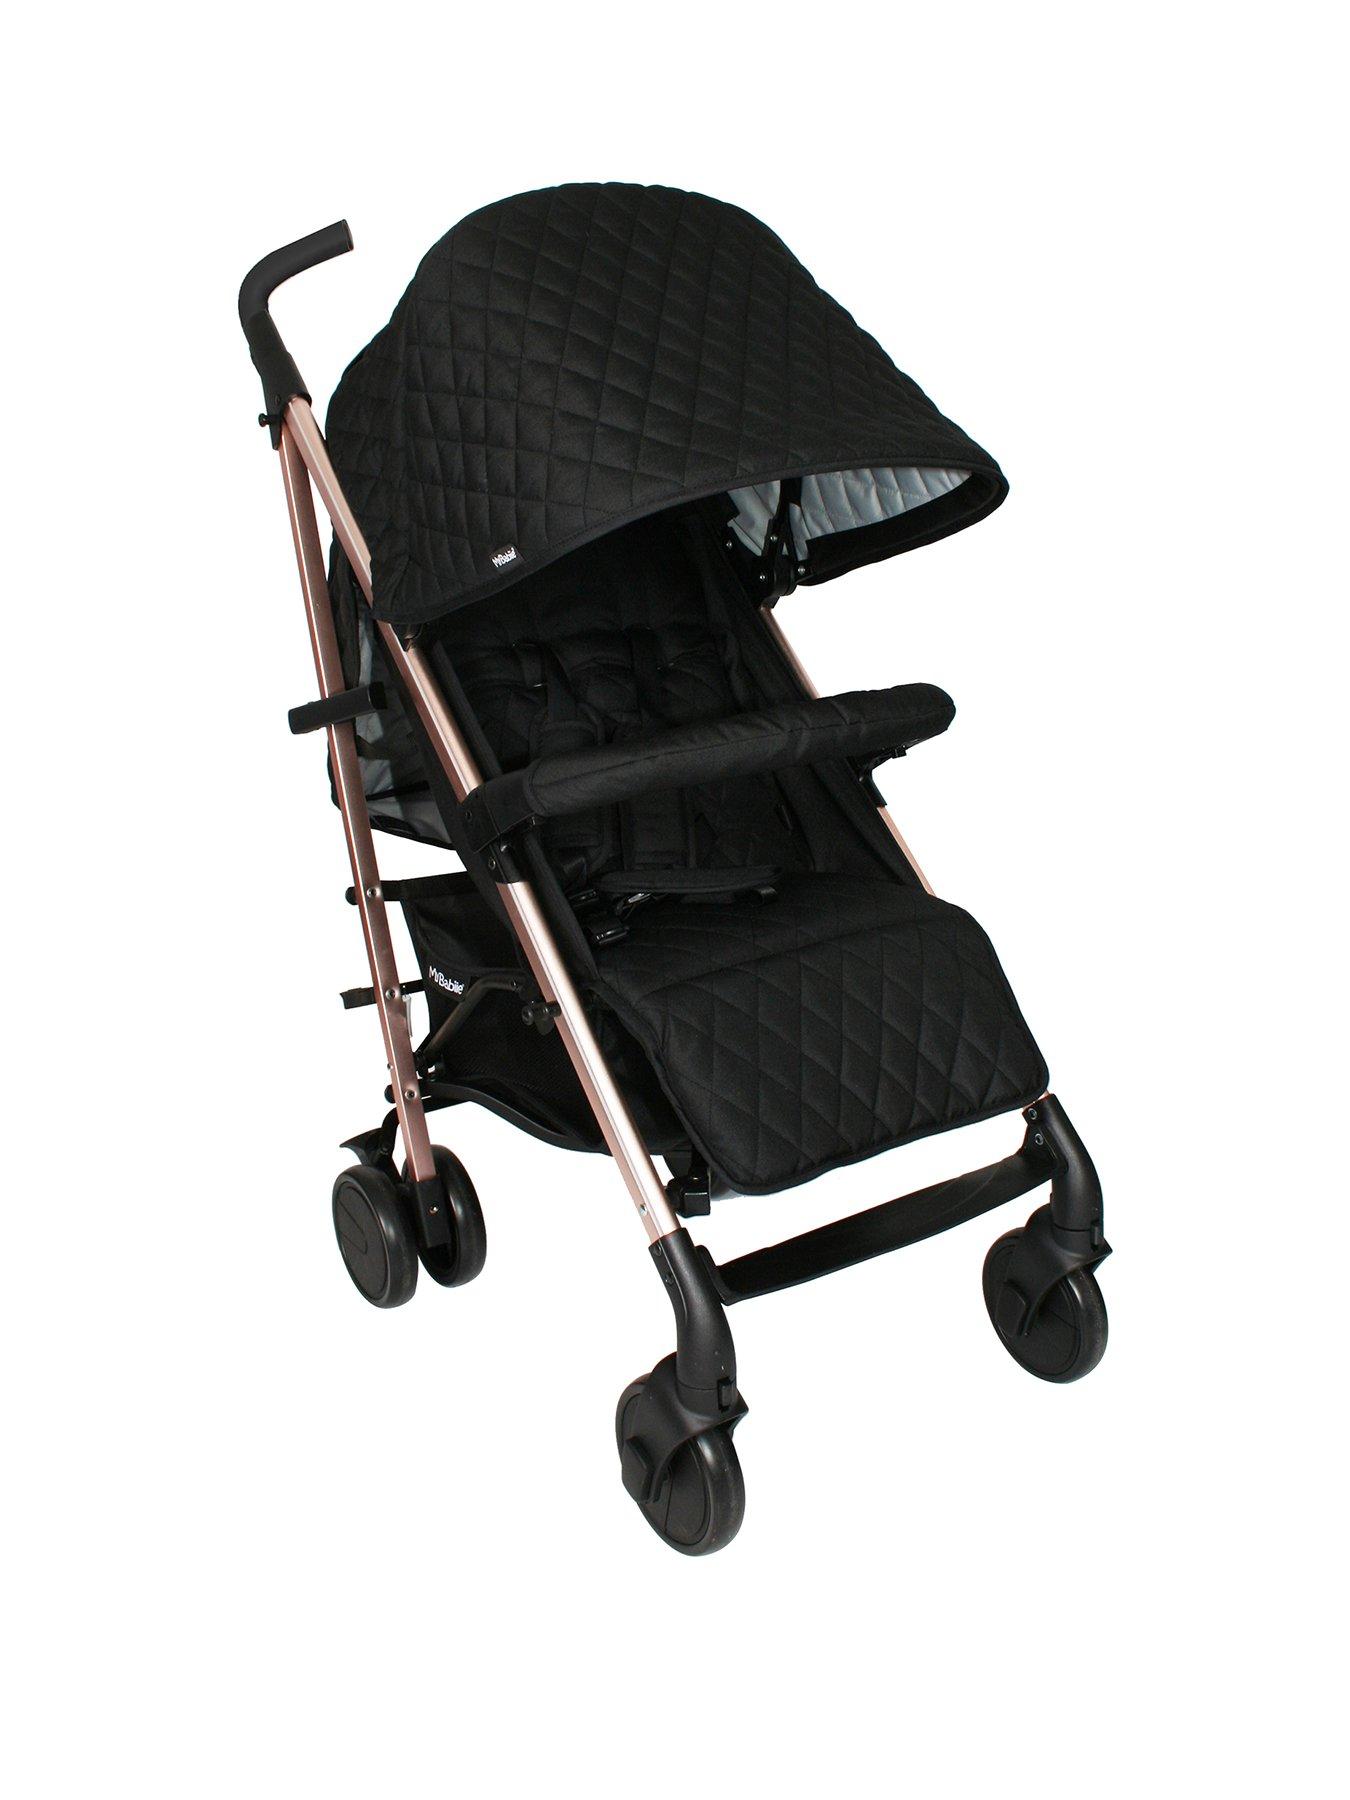 My Babiie Billie Faiers Mb51 Rose Gold Black Quilted Stroller